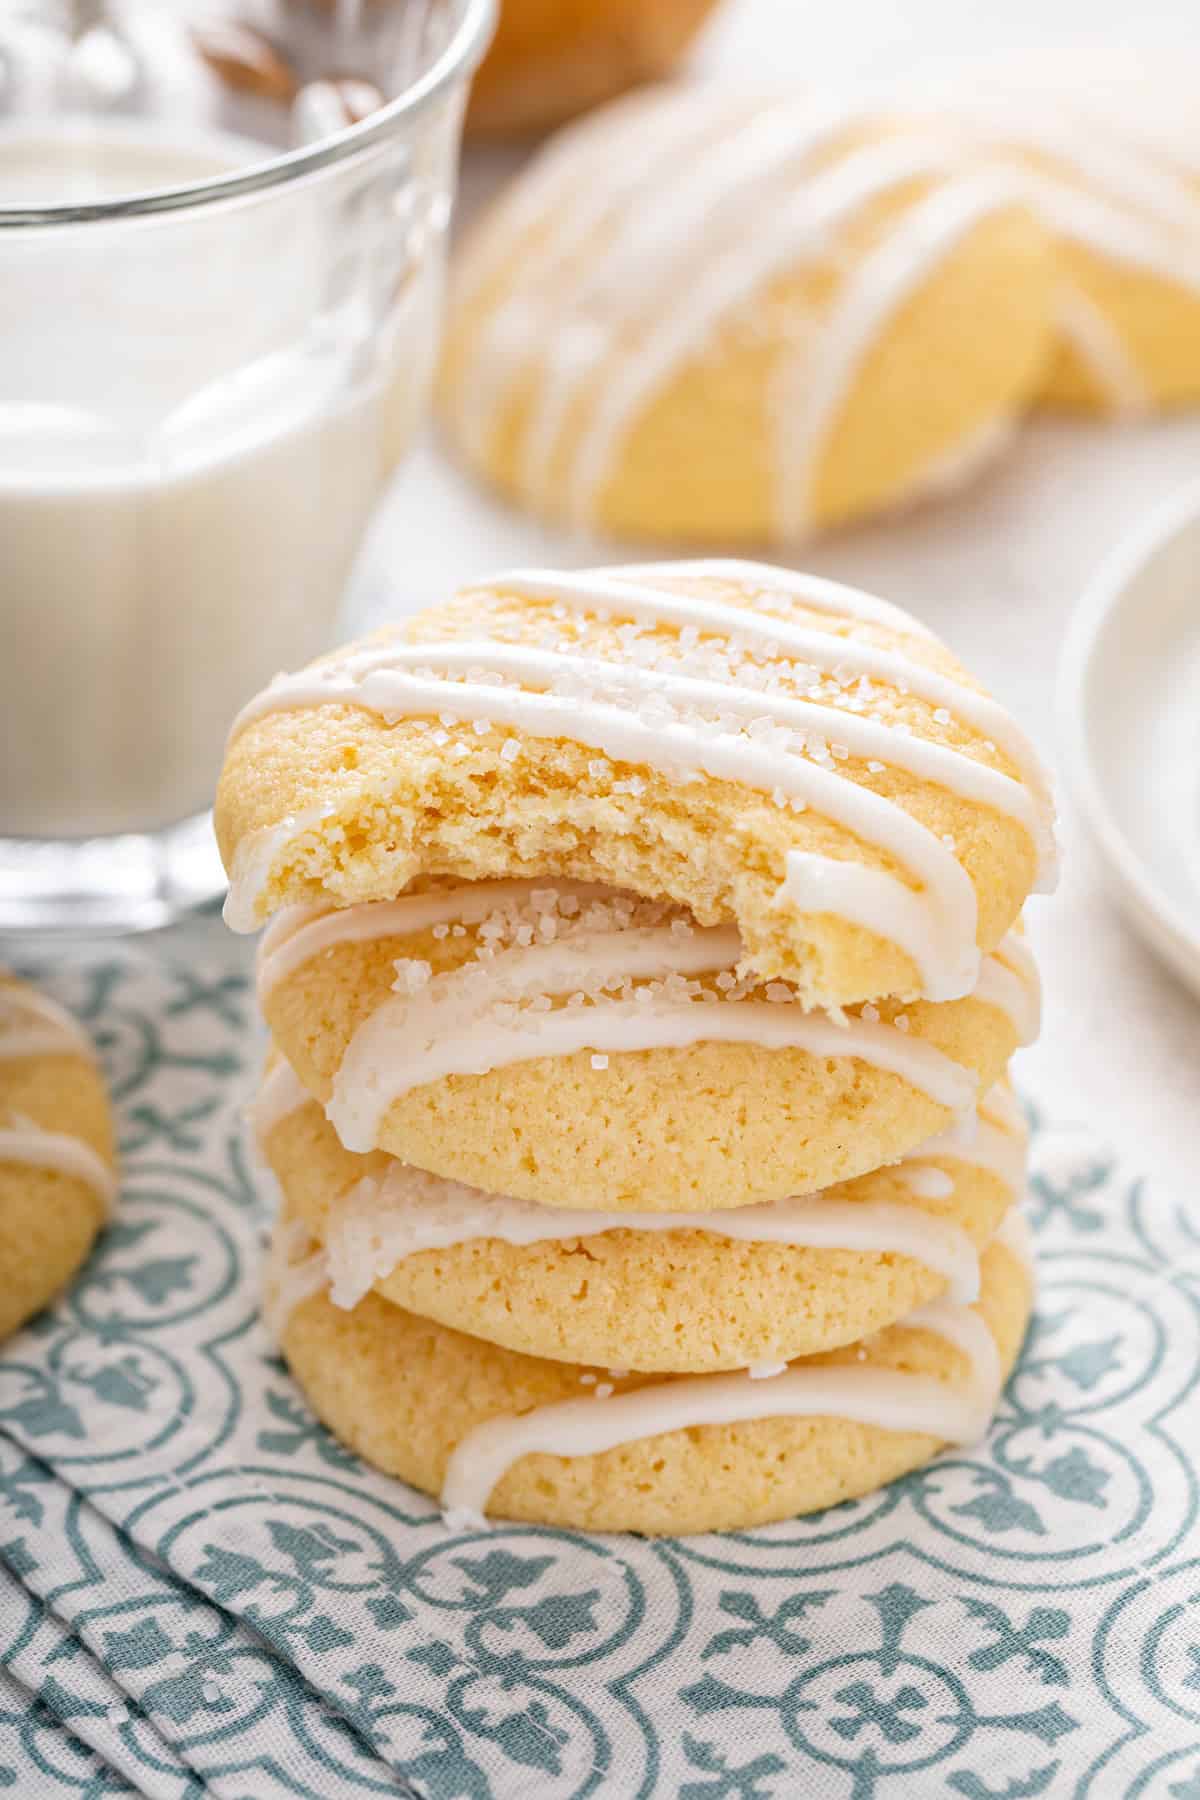 Stack of glazed pound cake cookies on a blue and white napkin. The top cookie has a bite taken from it.